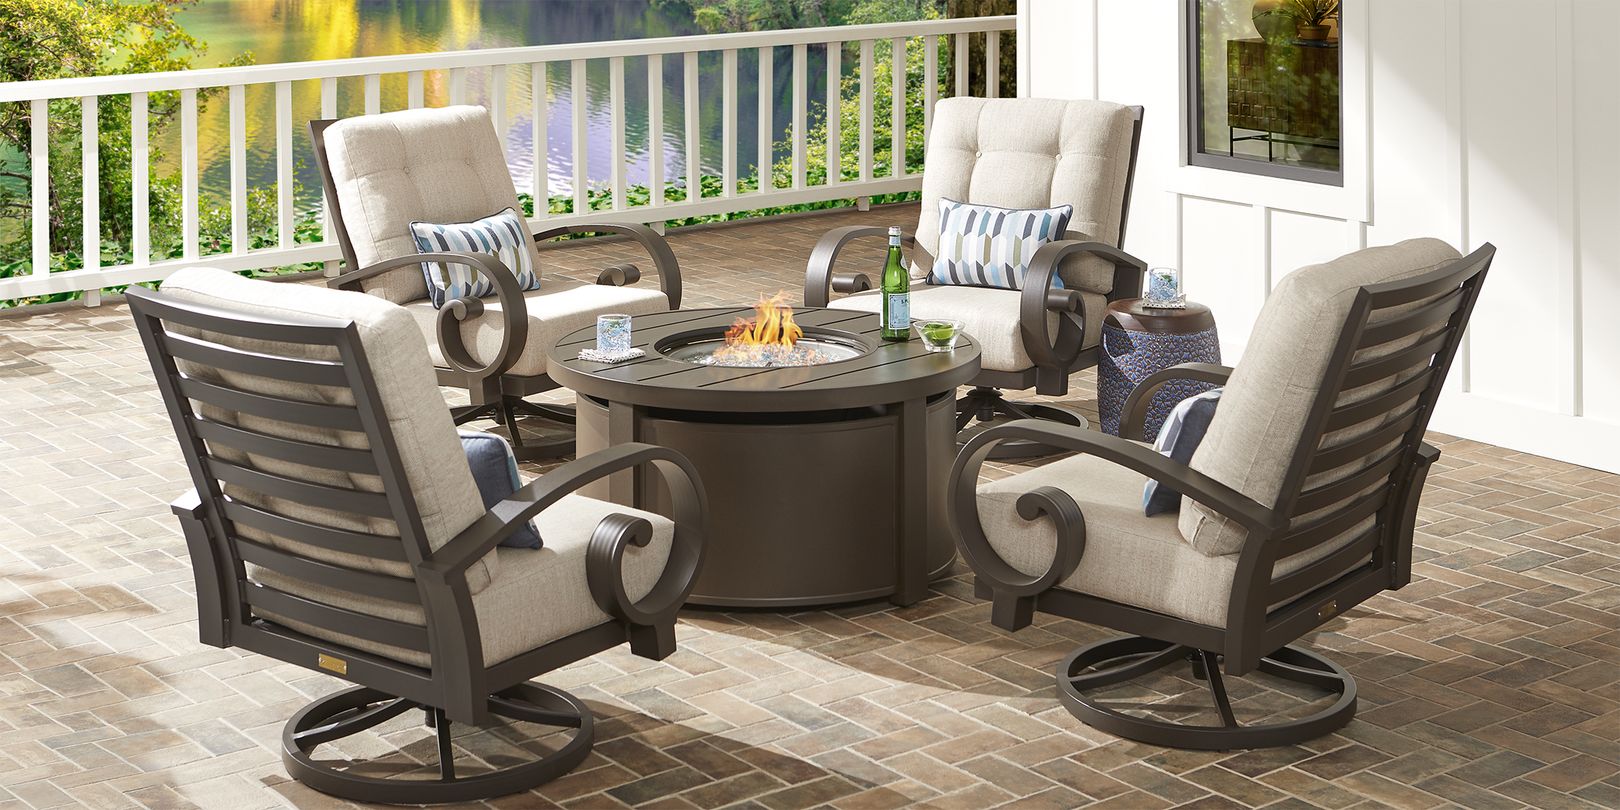 Photo of four bronze patio chairs and a fire pit table